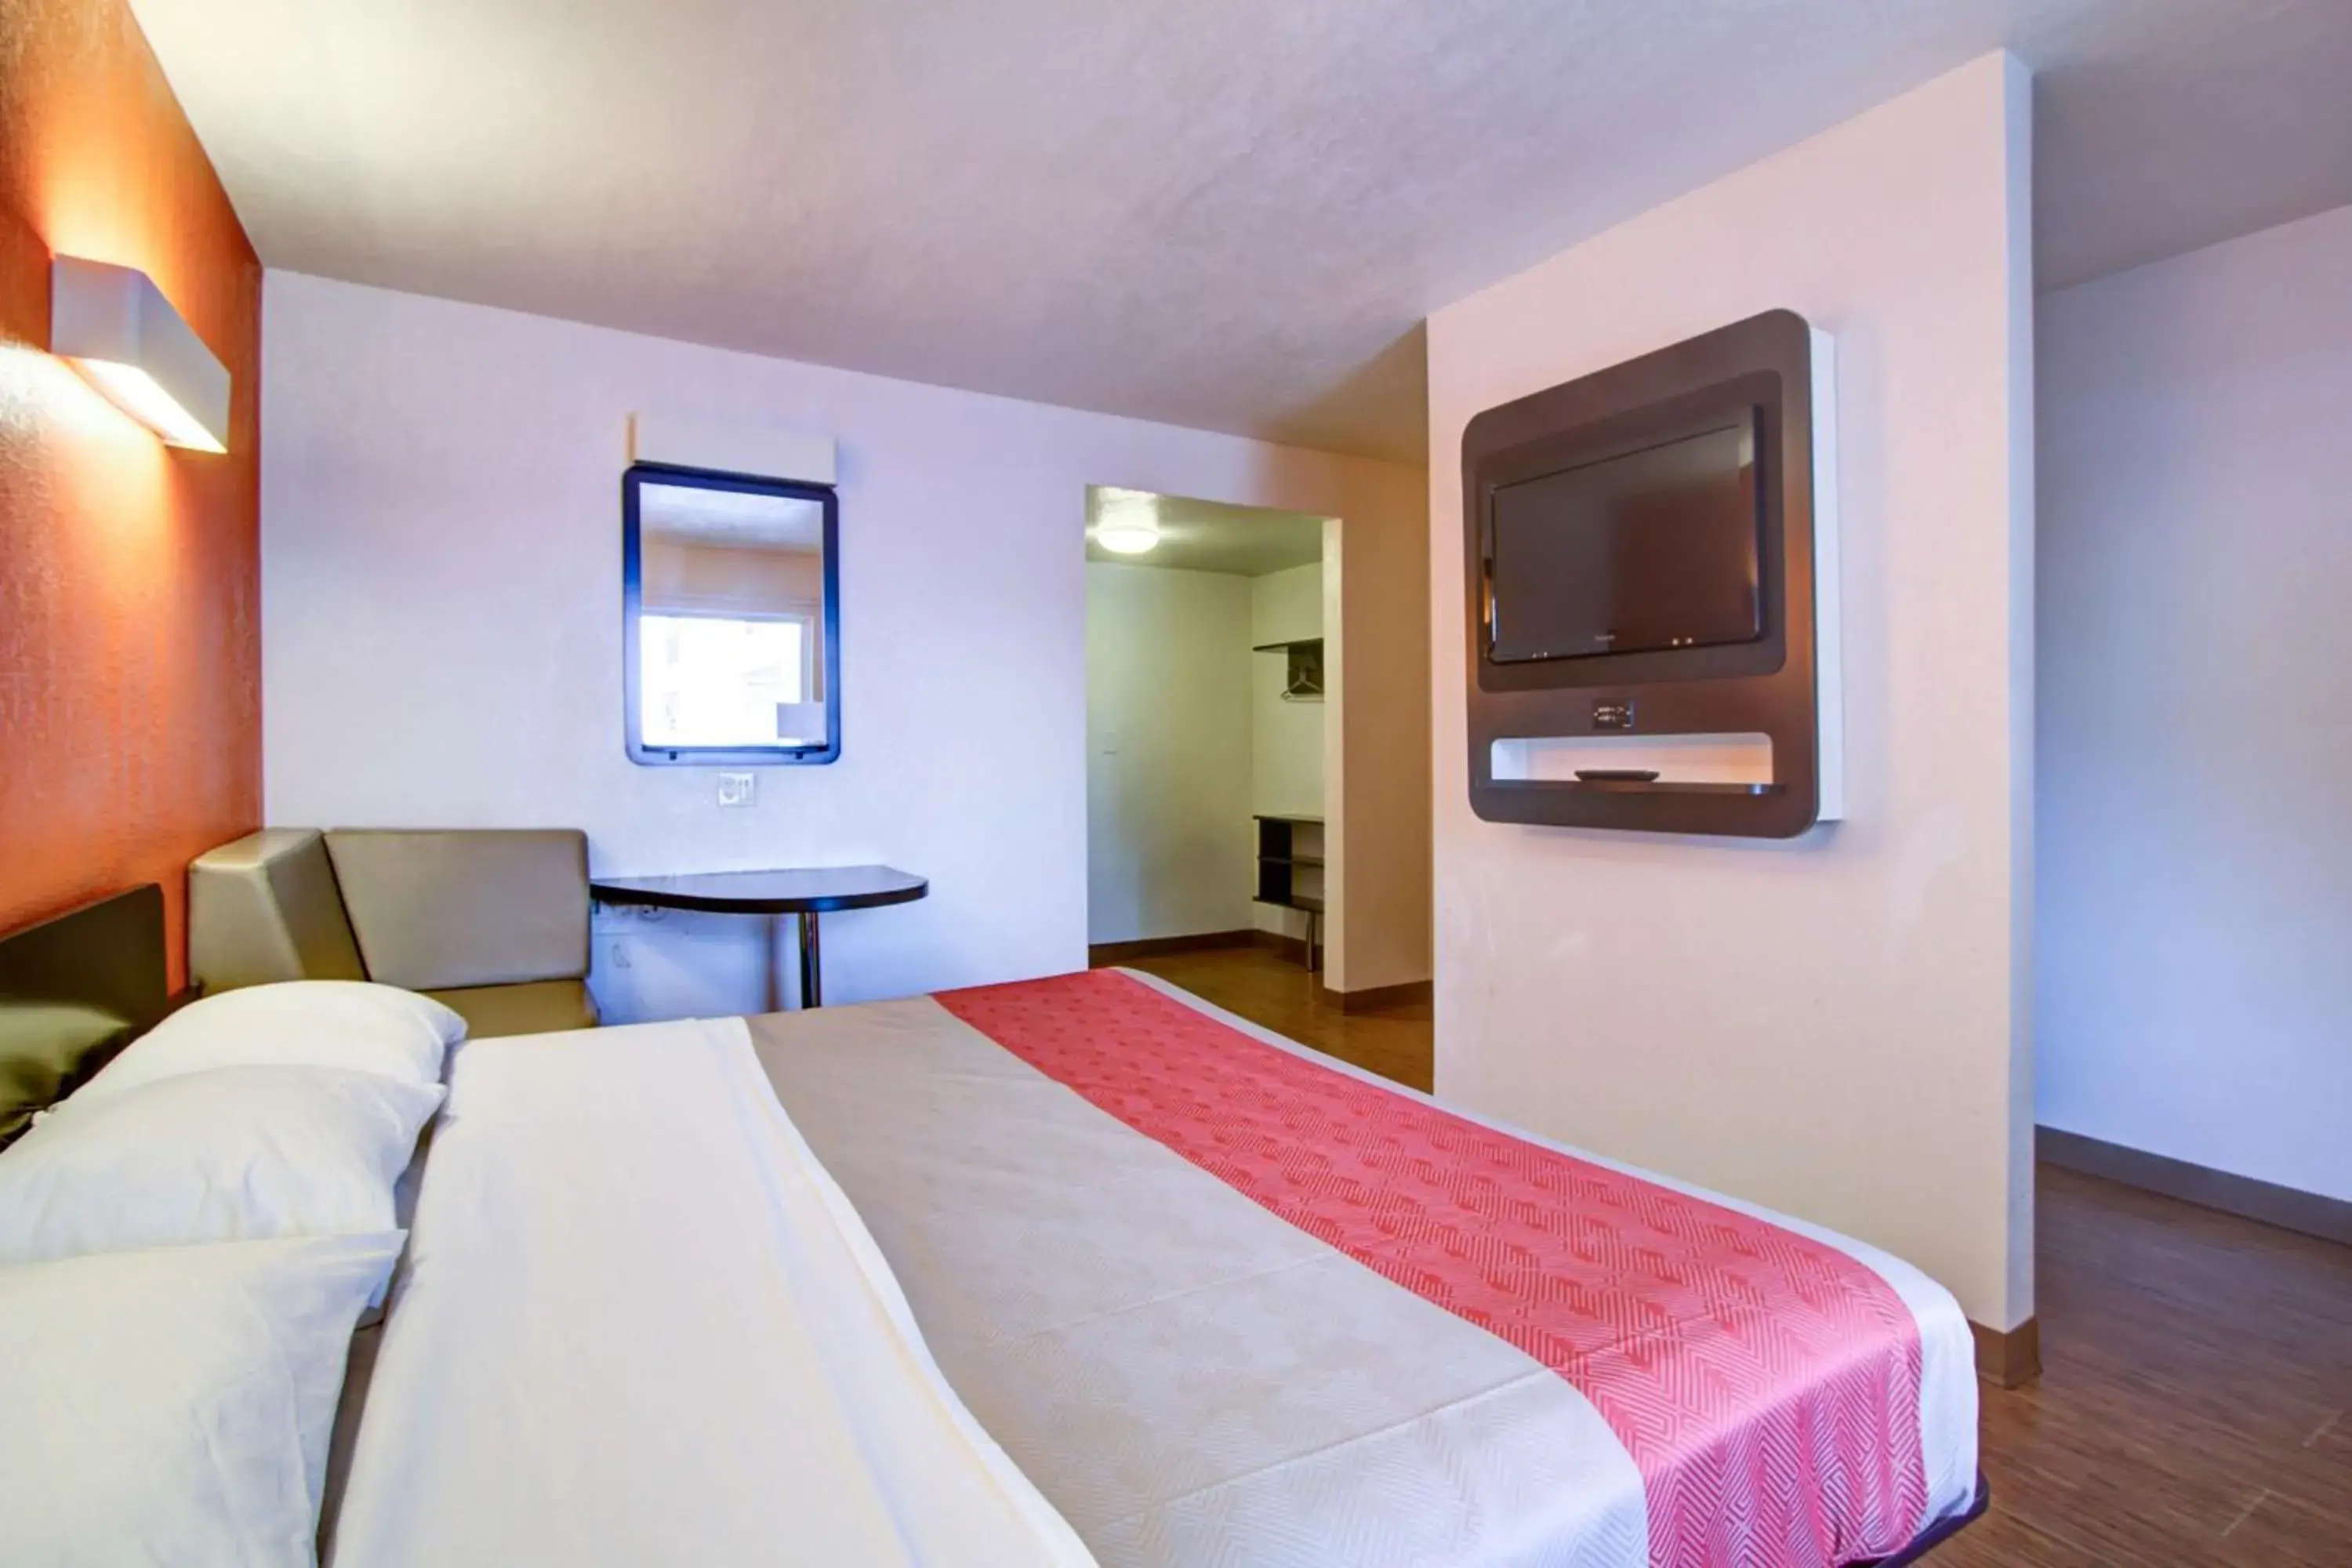 TV and multimedia, Room Photo in Motel 6-Richfield, OH